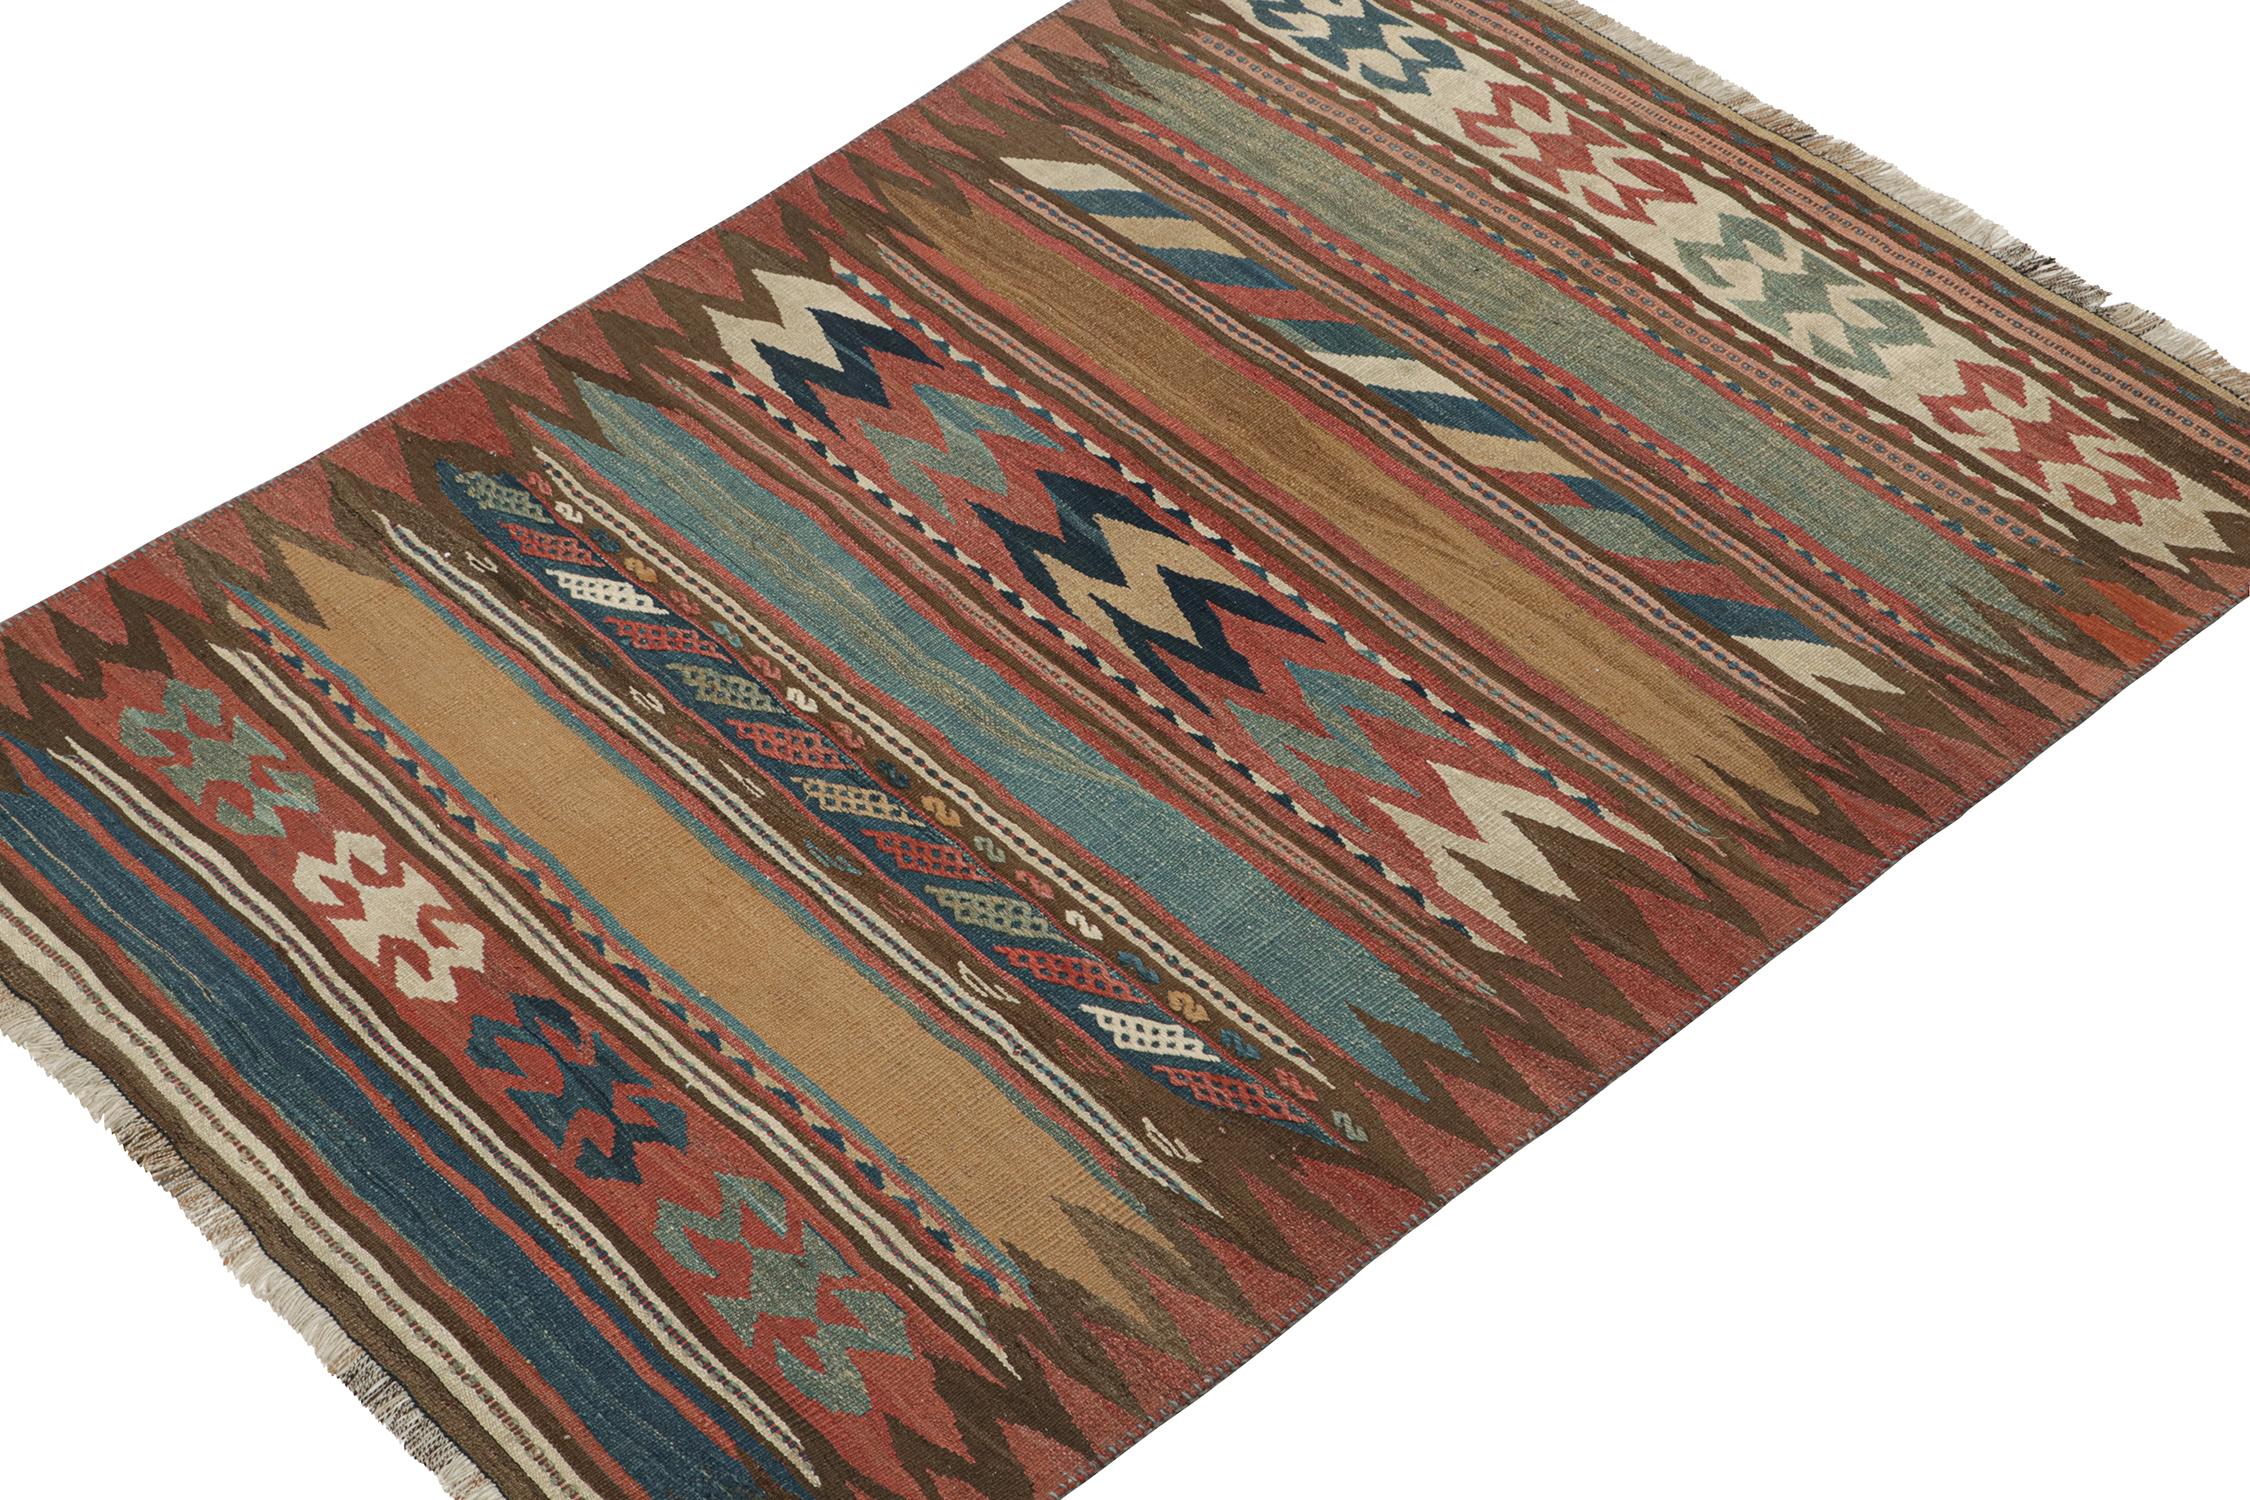 This vintage 4x5 Persian Kilim is a new addition of Bidjar provenance in Rug & Kilim's rare tribal curations. Handwoven in wool circa 1950-1960.

Further on the Design: 

Bidjar Kilims like this are reputed for their durability and distinct